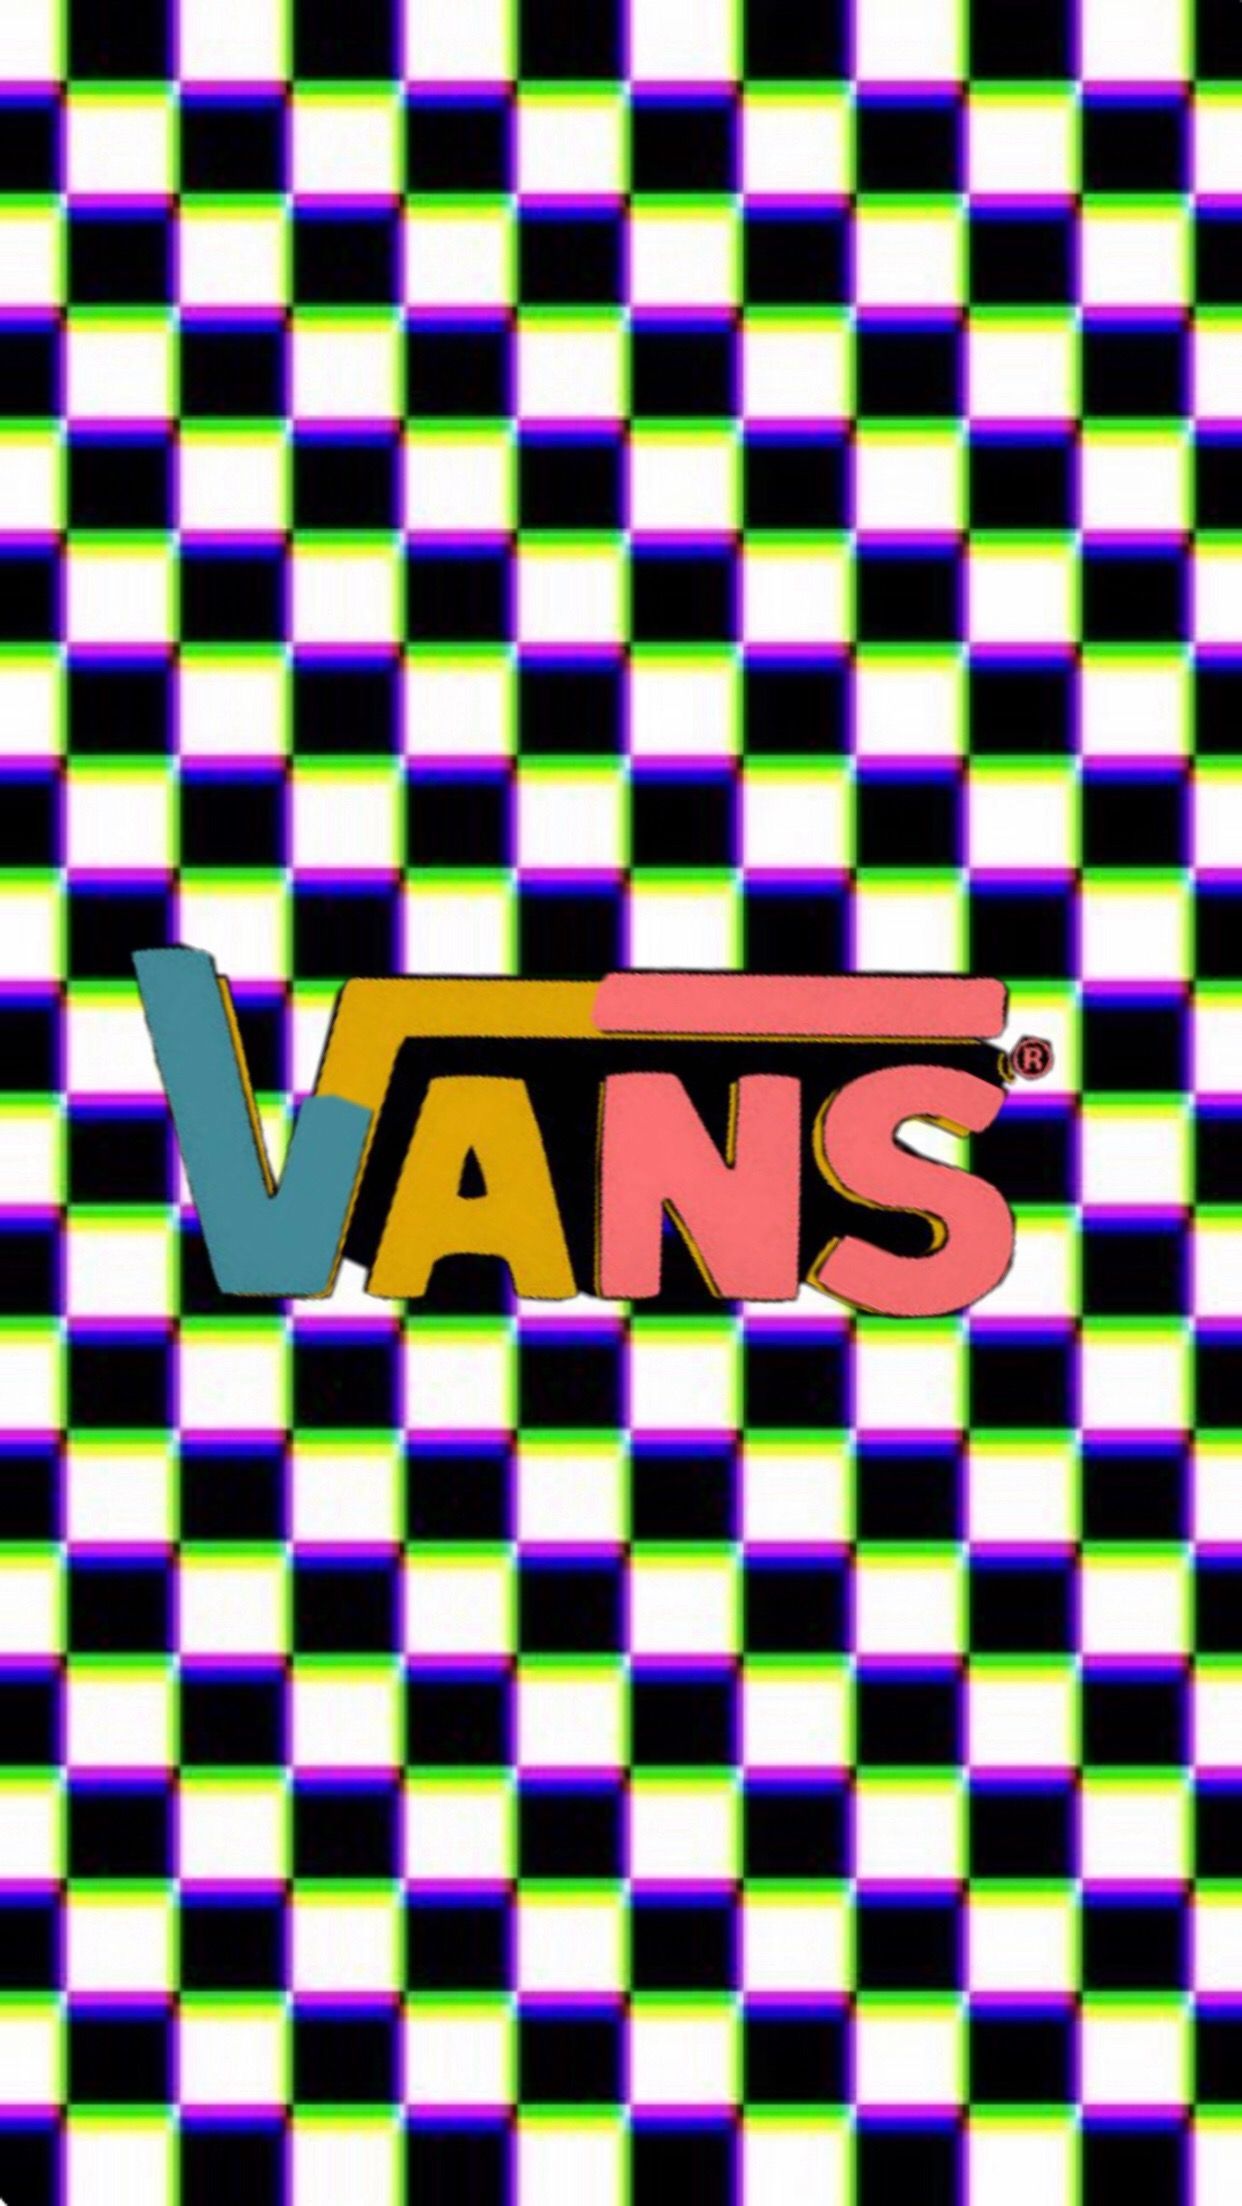 A colorful vans logo on a black, blue, green, and white checkered background - Vans, checkered